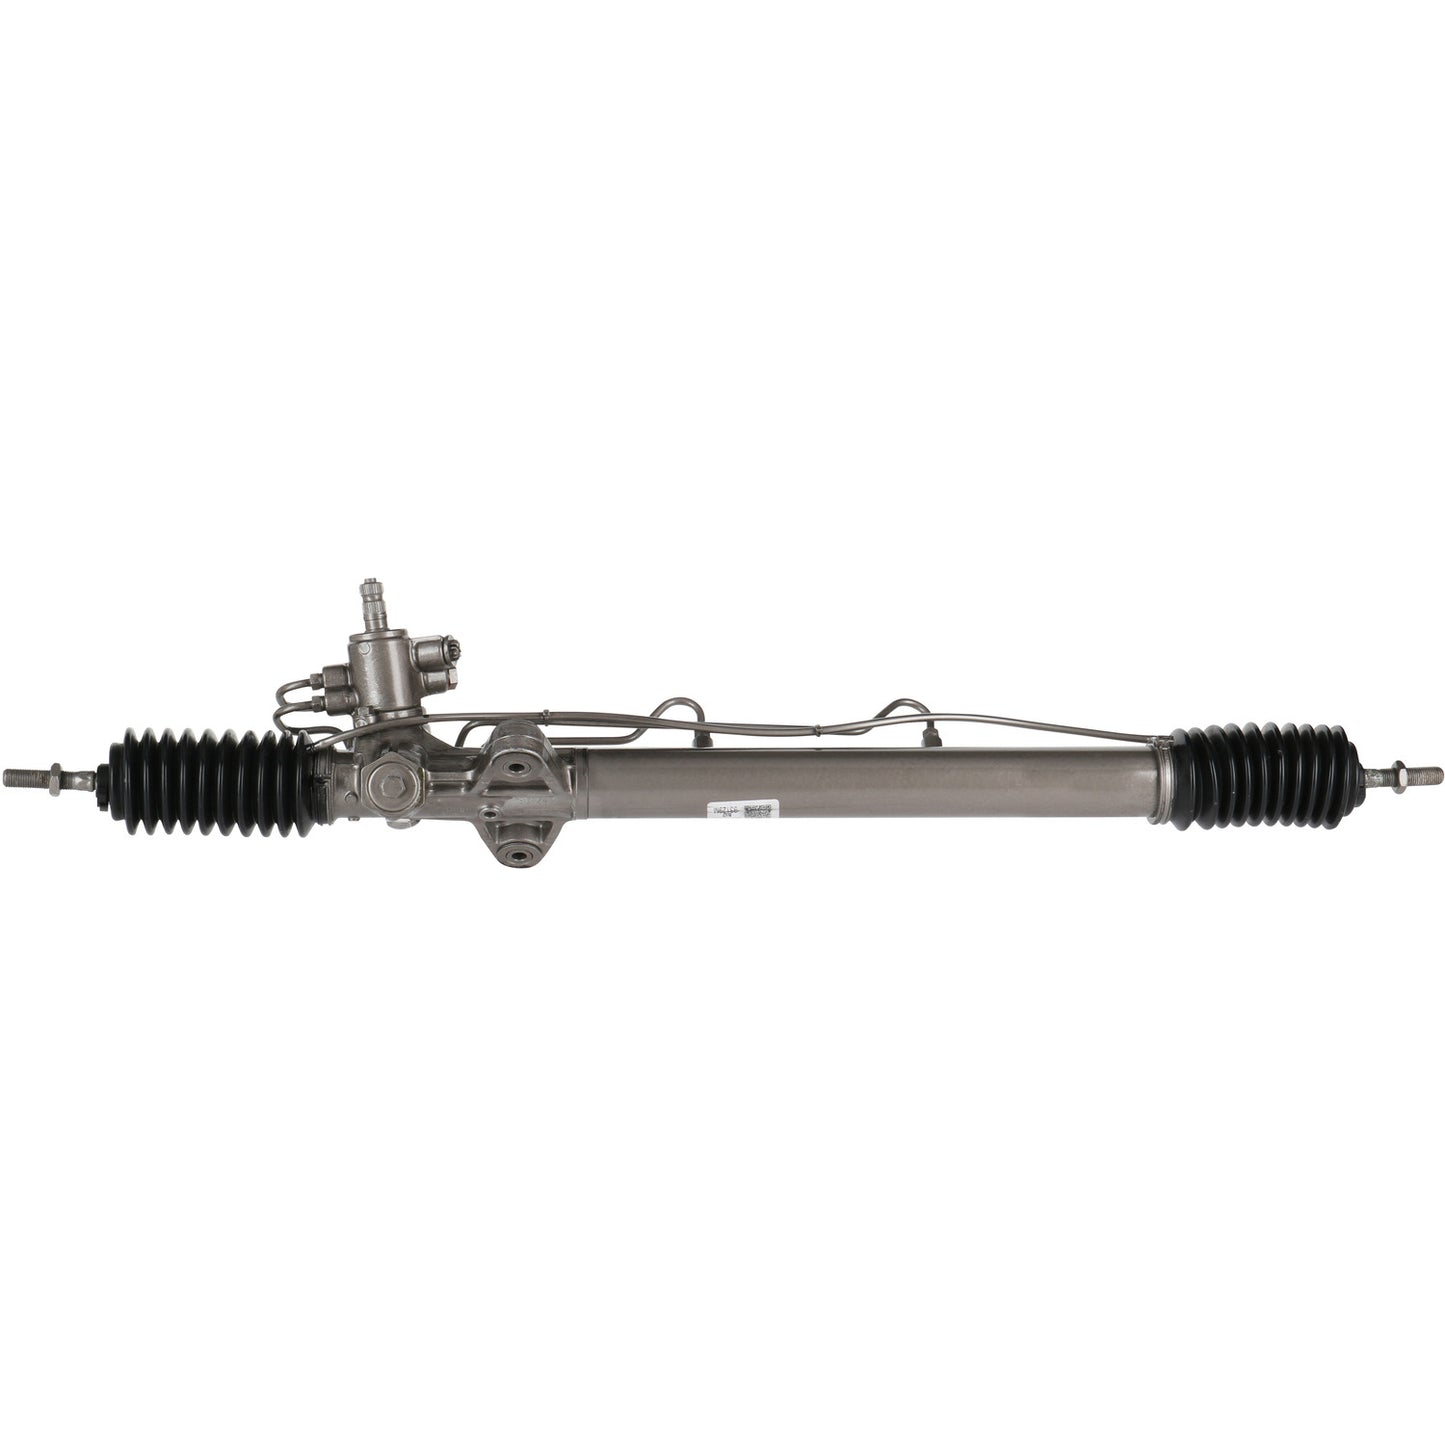 Rack and Pinion Assembly - MAVAL - Hydraulic Power - Remanufactured - 93129M